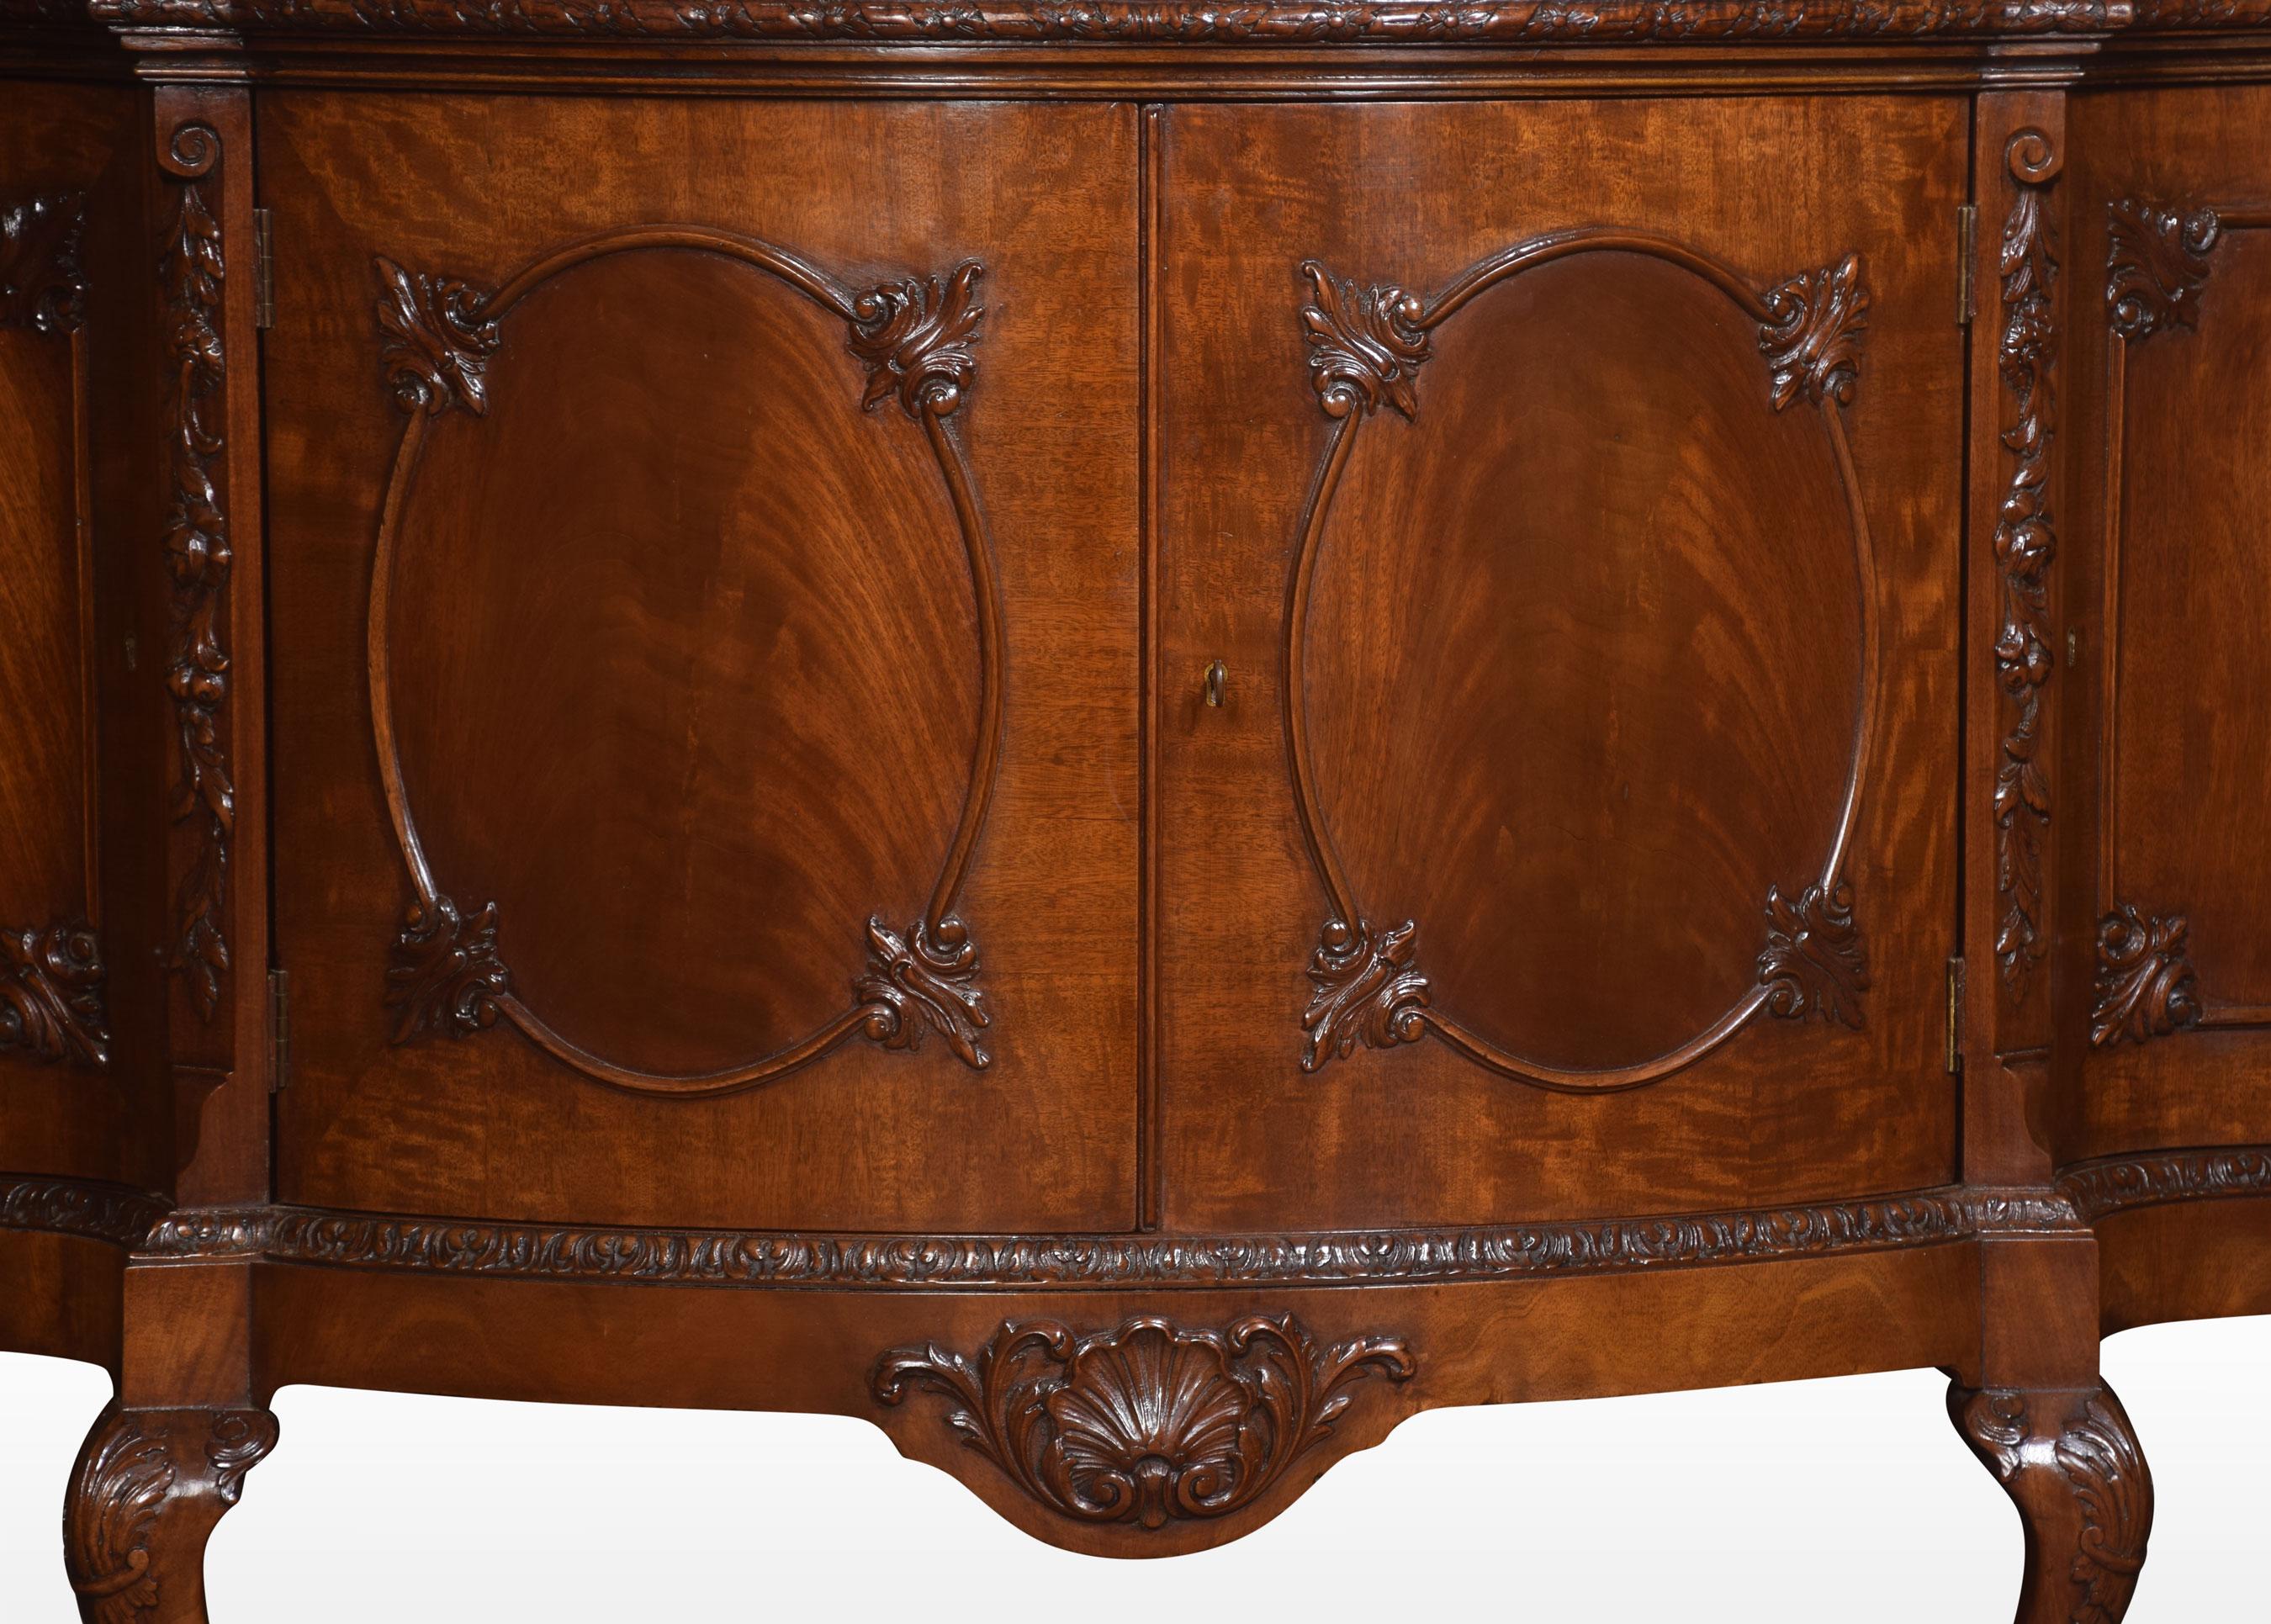 Mahogany sideboard, the large serpentine top with a carved rim. Above two oval moulded mahogany paneled doors opening to reveal large fixed shelf. Flanked by two similar cupboards. All raised up on four cabriolet legs terminating in claw and ball